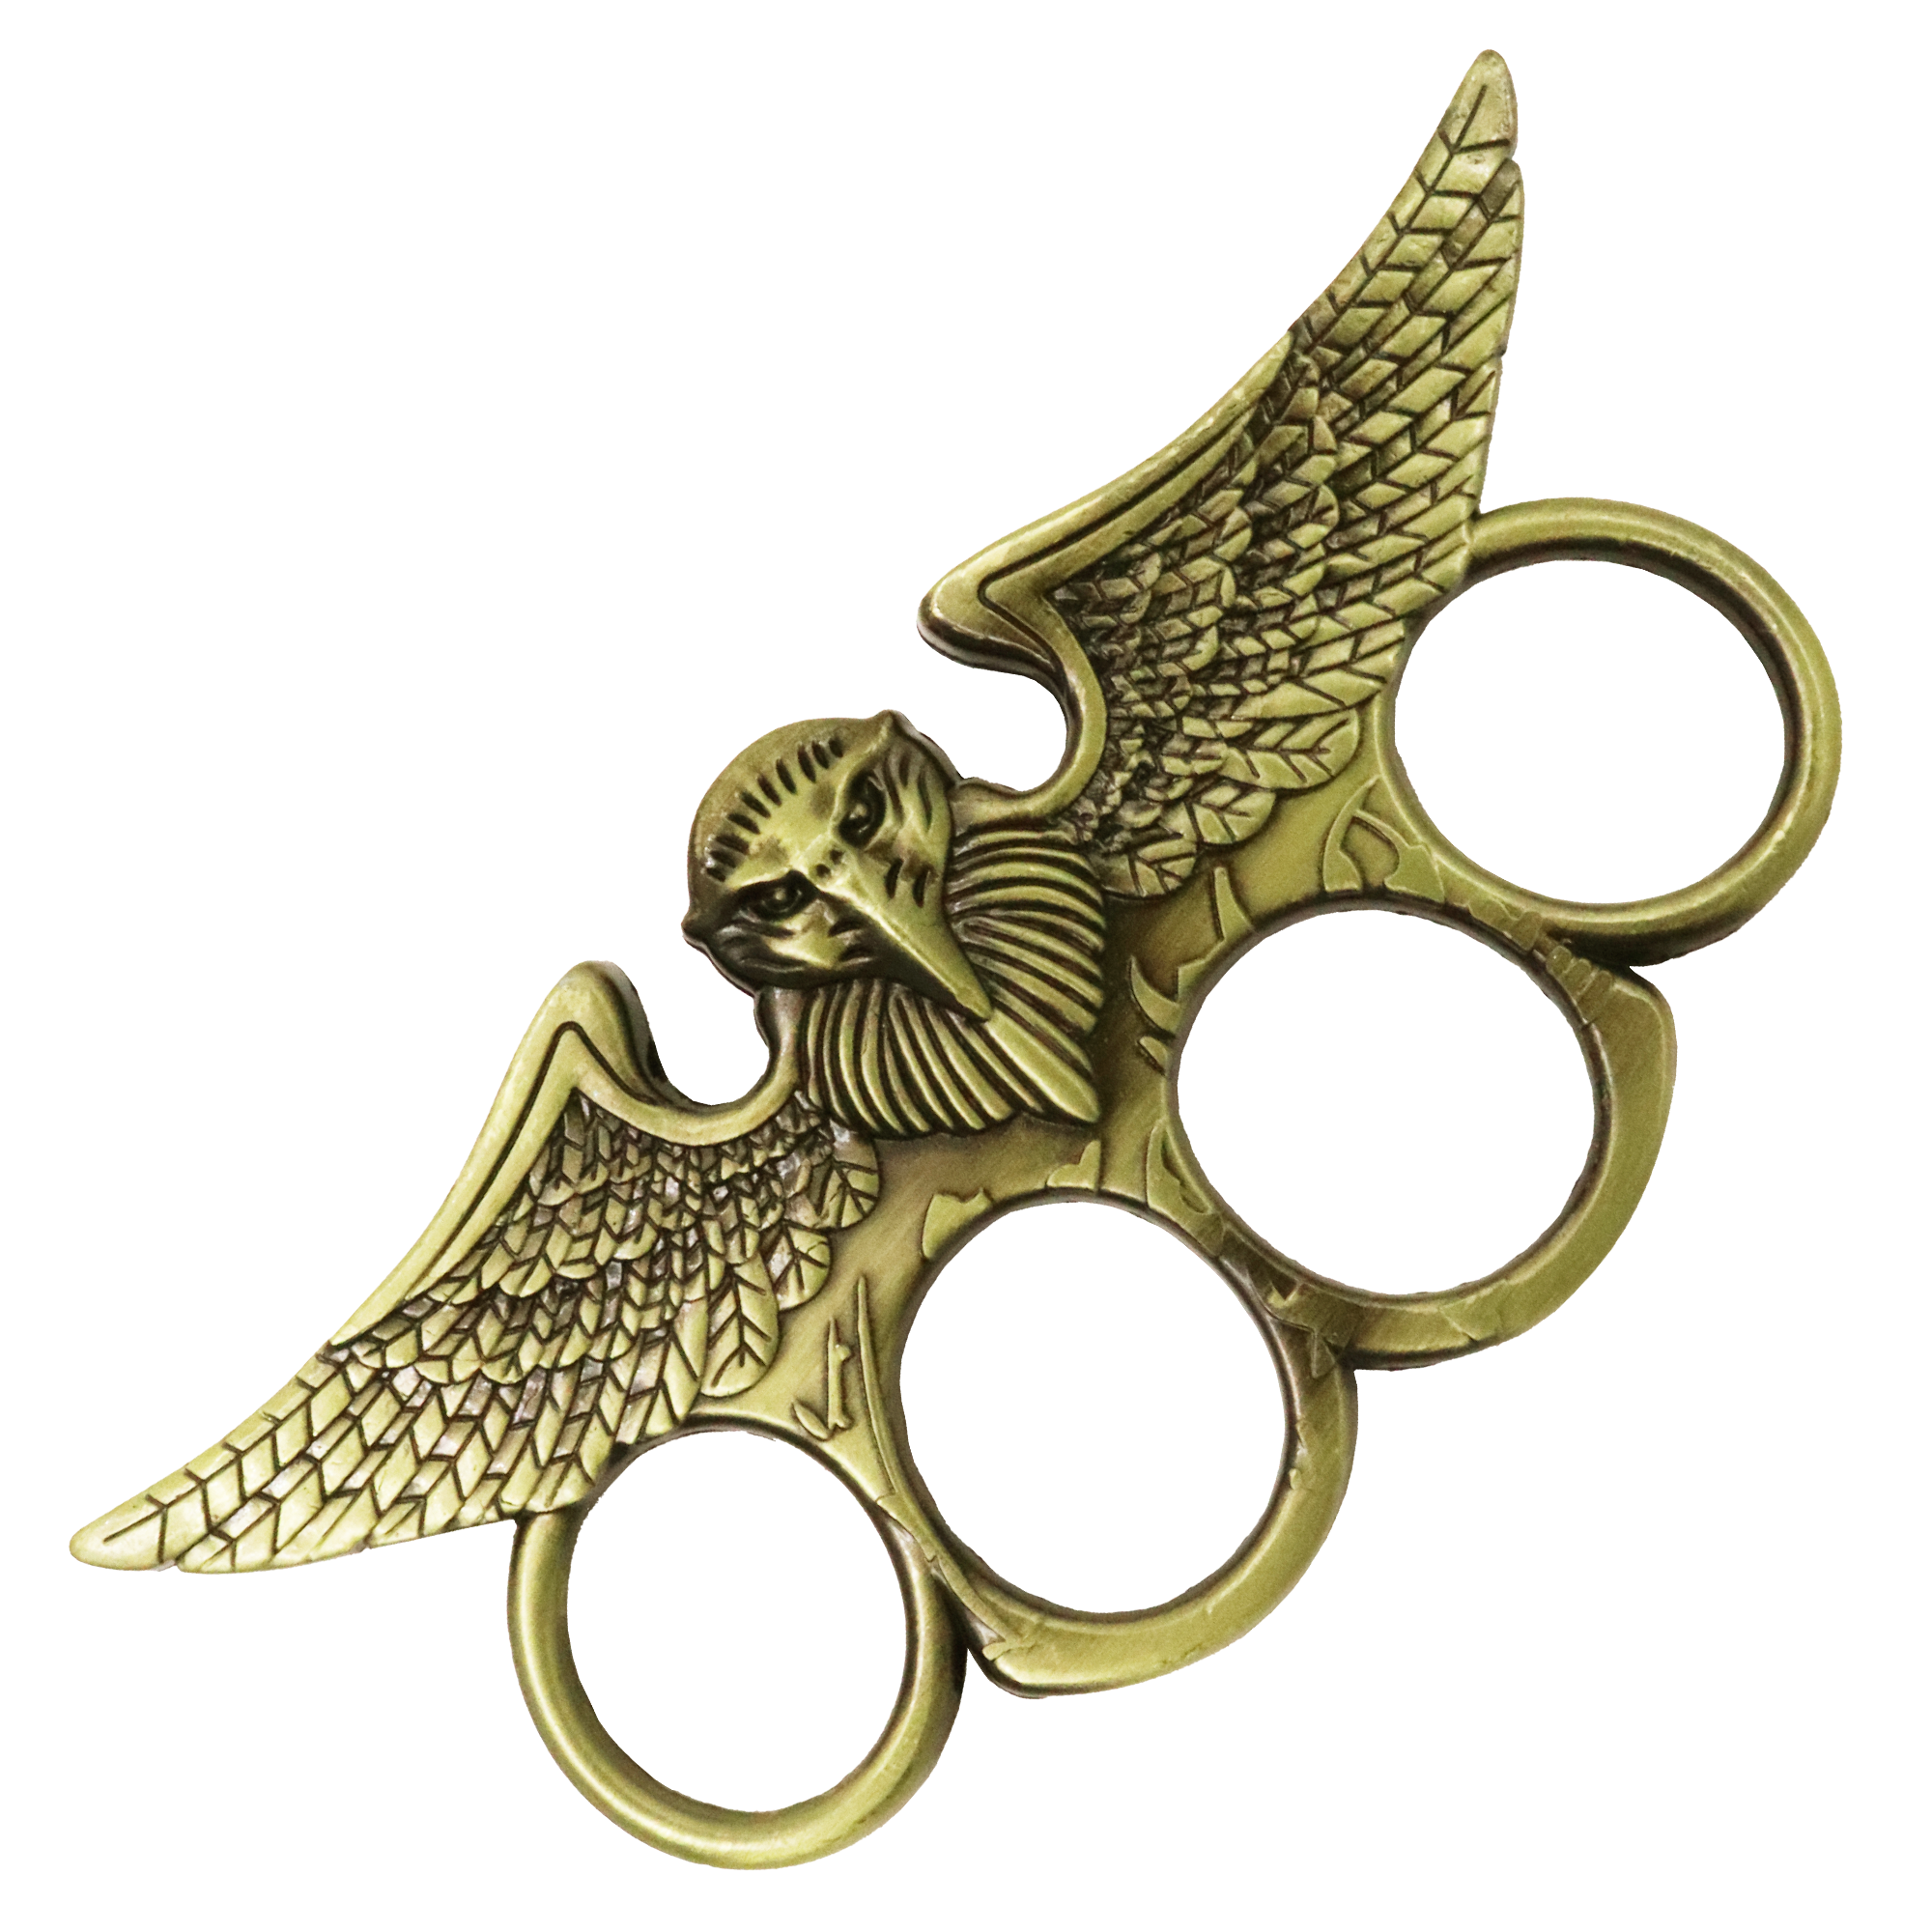 https://cdn.shopify.com/s/files/1/1721/5605/products/brassknuckleeaglefreedom.png?v=1650642387